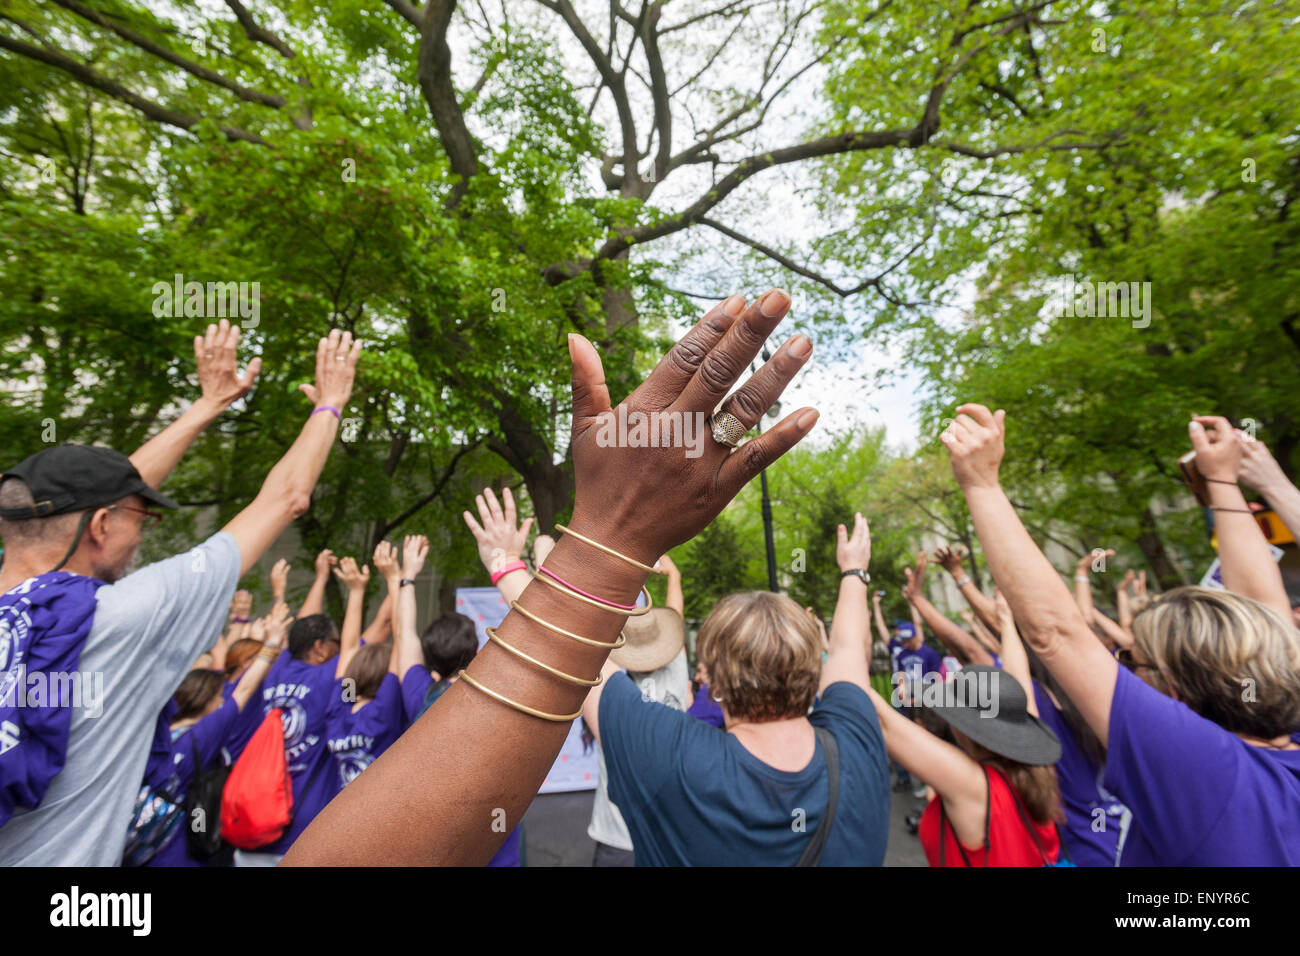 Members and supporters of the group Milagros Day Worldwide raise their hands prior to their their Mother's Day Walk against domestic violence, starting at City Hall in New York on Mother's Day, Sunday, May 10, 2015. Several hundred men, women and children, some of them victims,  participated in their warm up pep rally and walked across the bridge to raise money and awareness for the victims of domestic violence. (© Richard B. Levine) Stock Photo